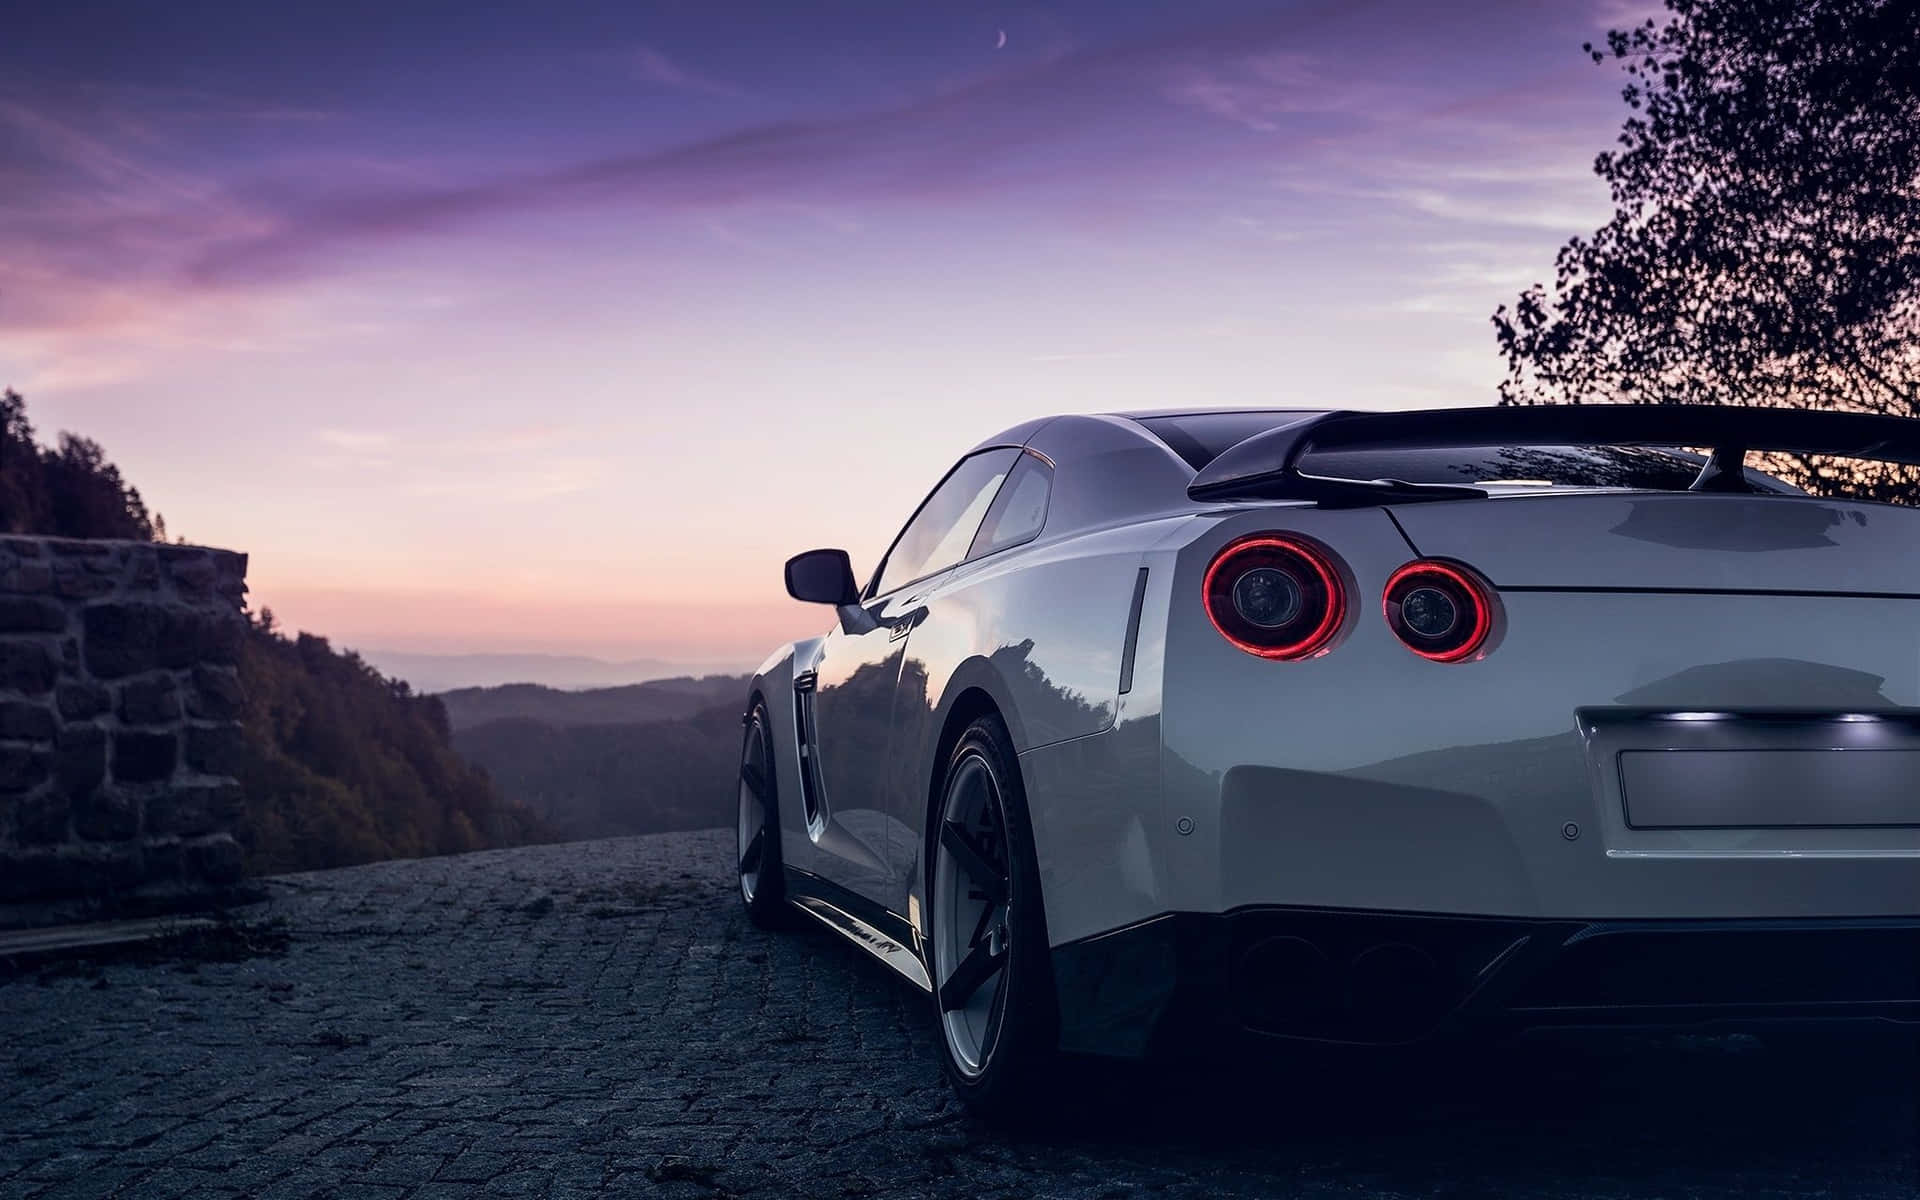 A White Sports Car Parked On A Road At Sunset Background